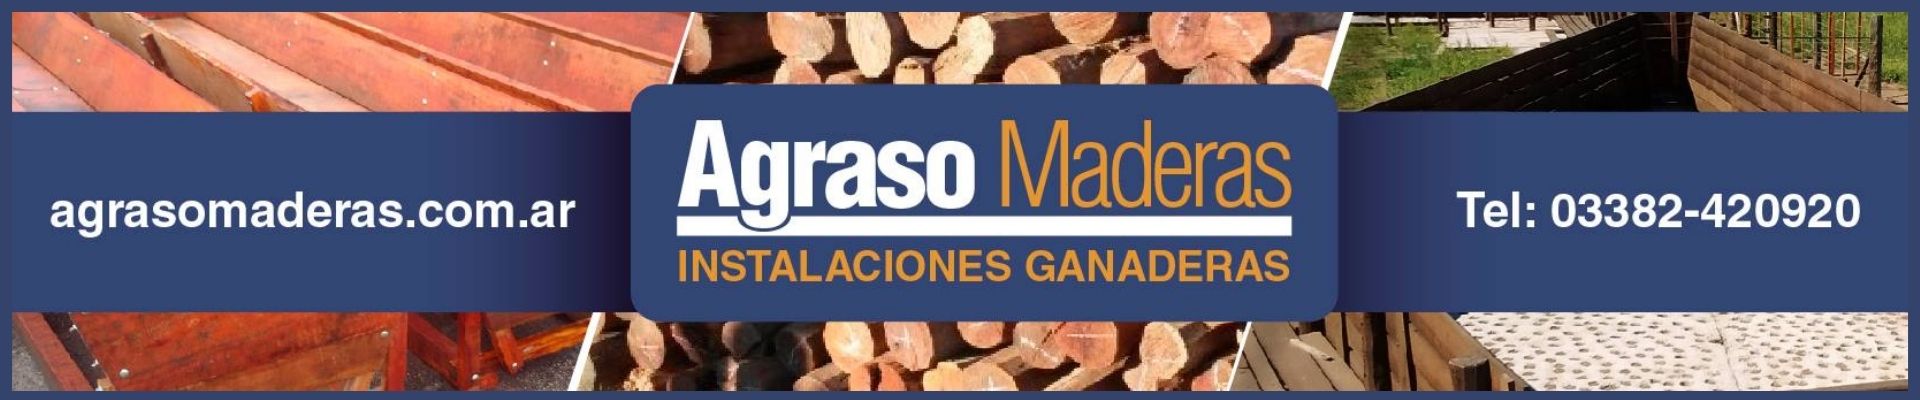 Agraso Maderas agroshow banner